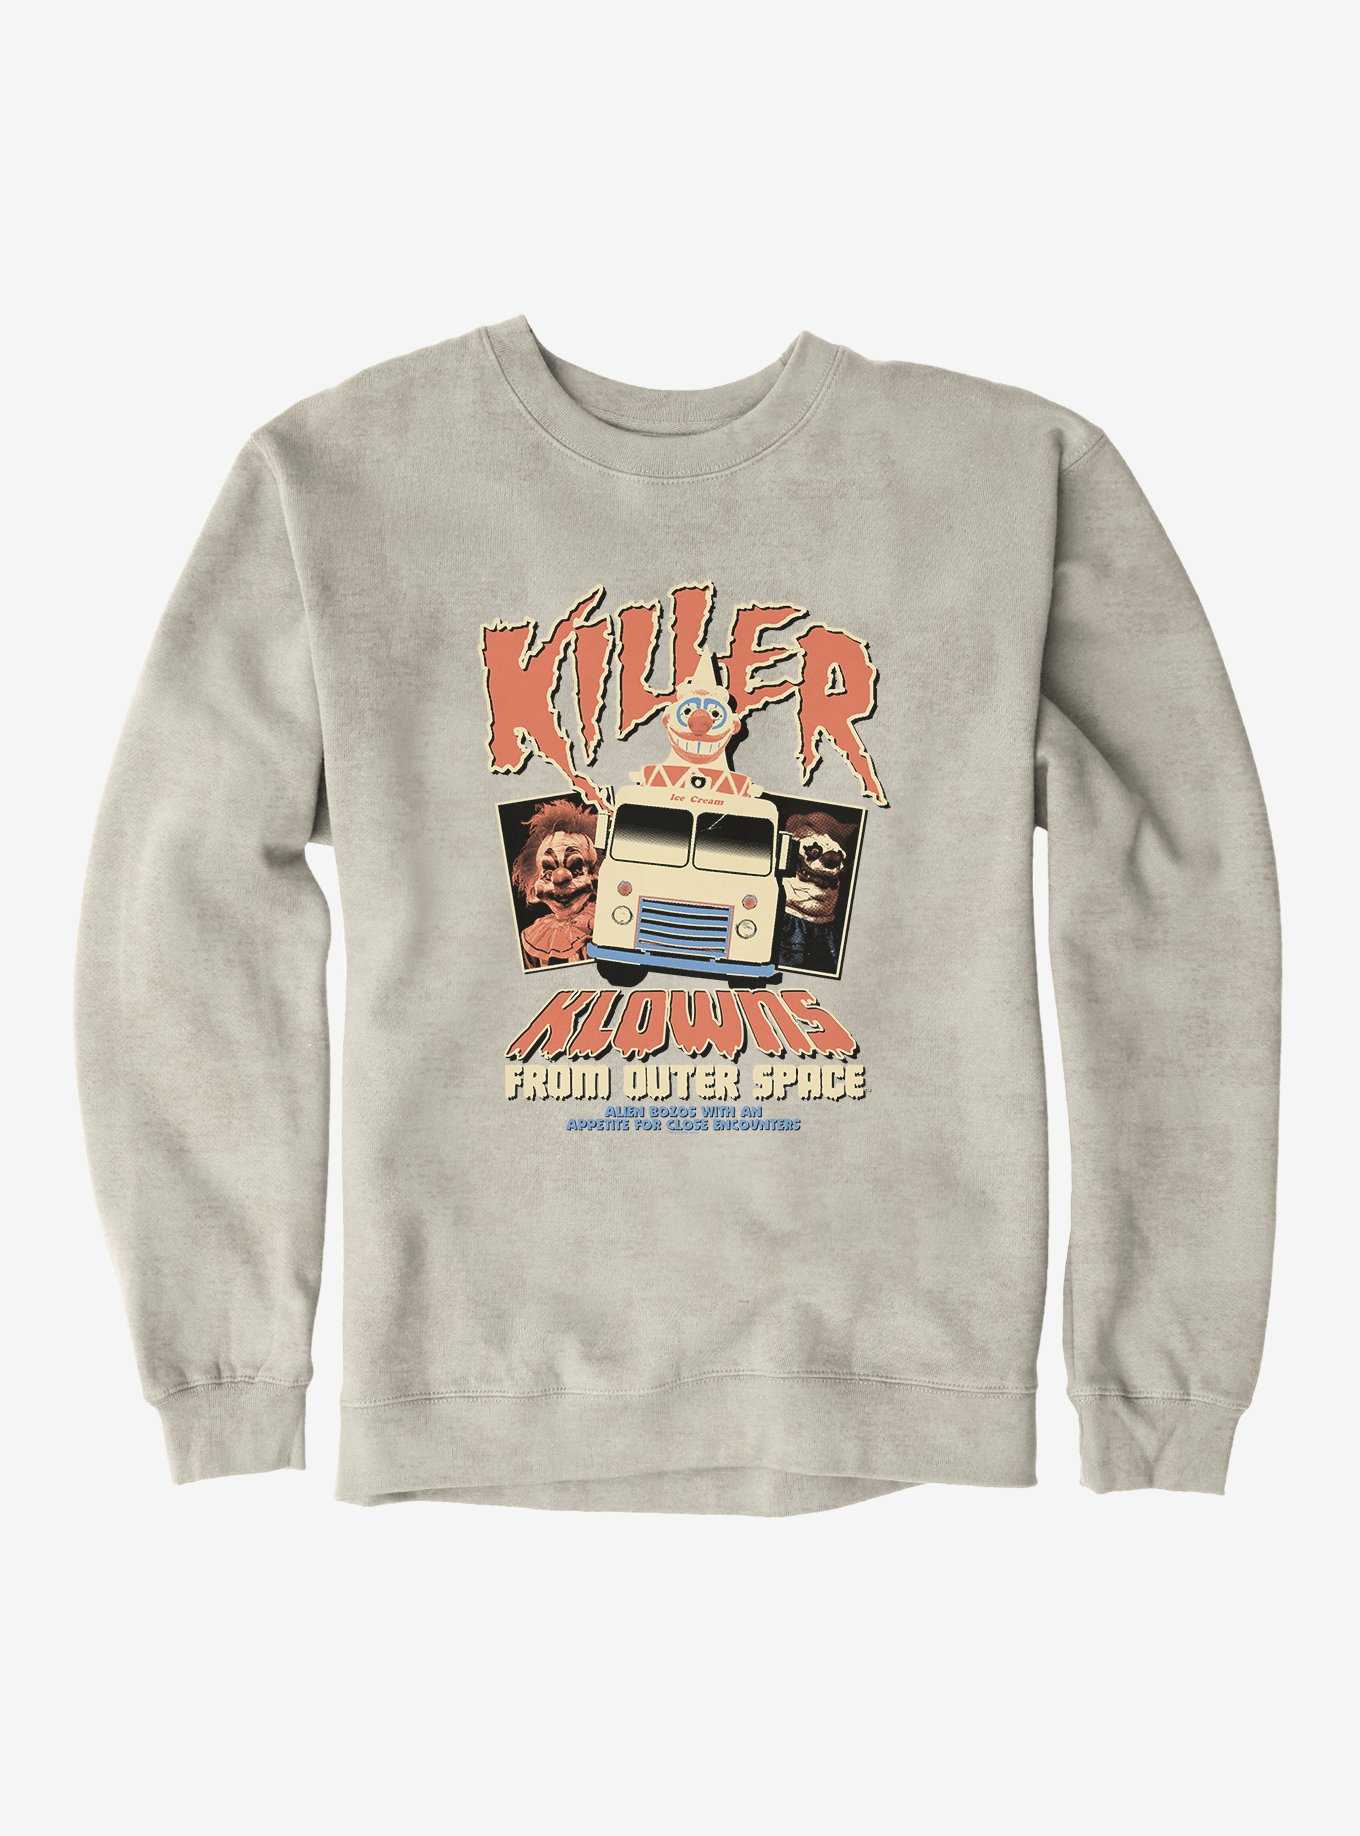 Killer Klowns From Outer Space Vintage Movie Poster Sweatshirt, , hi-res